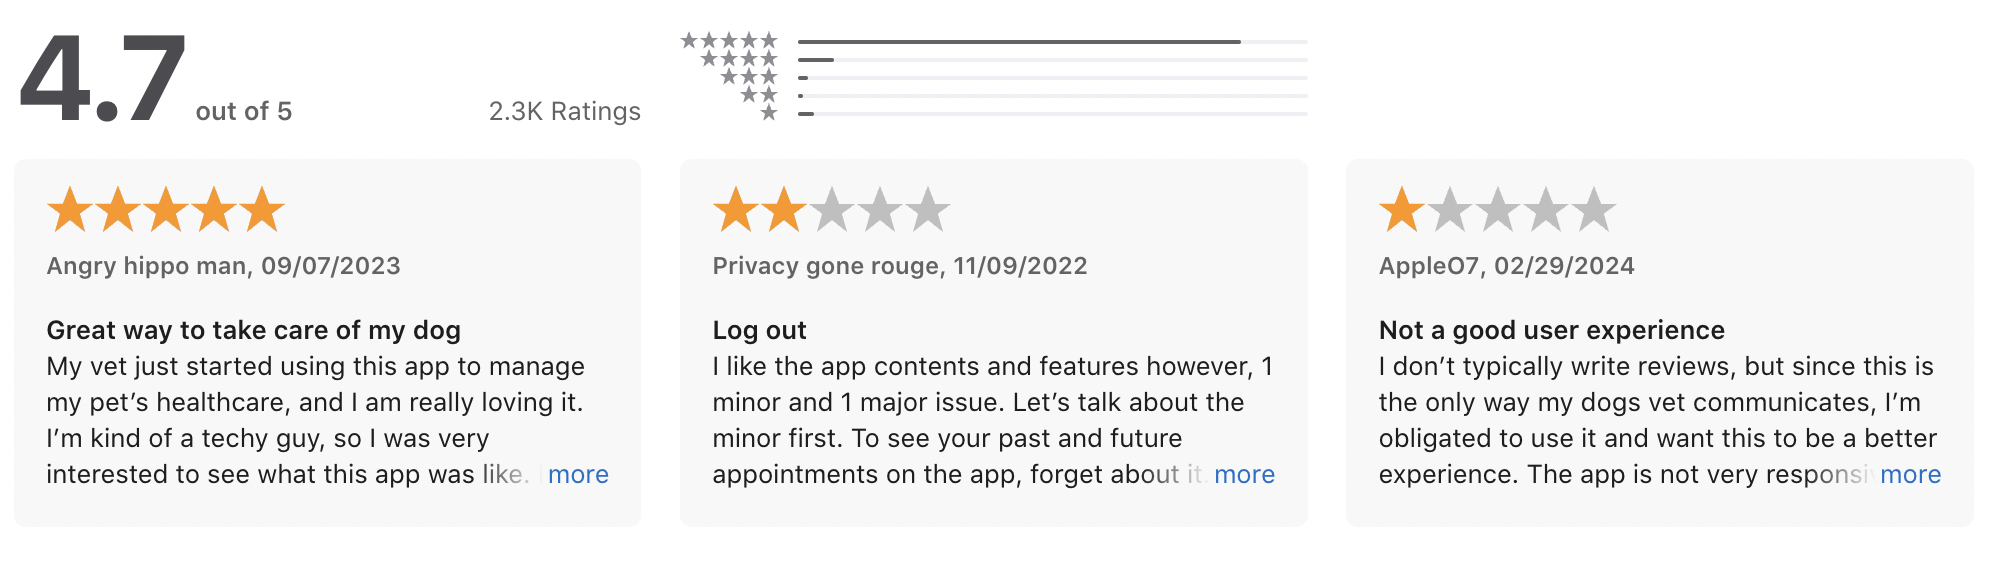 Otto Reviews on the App Store